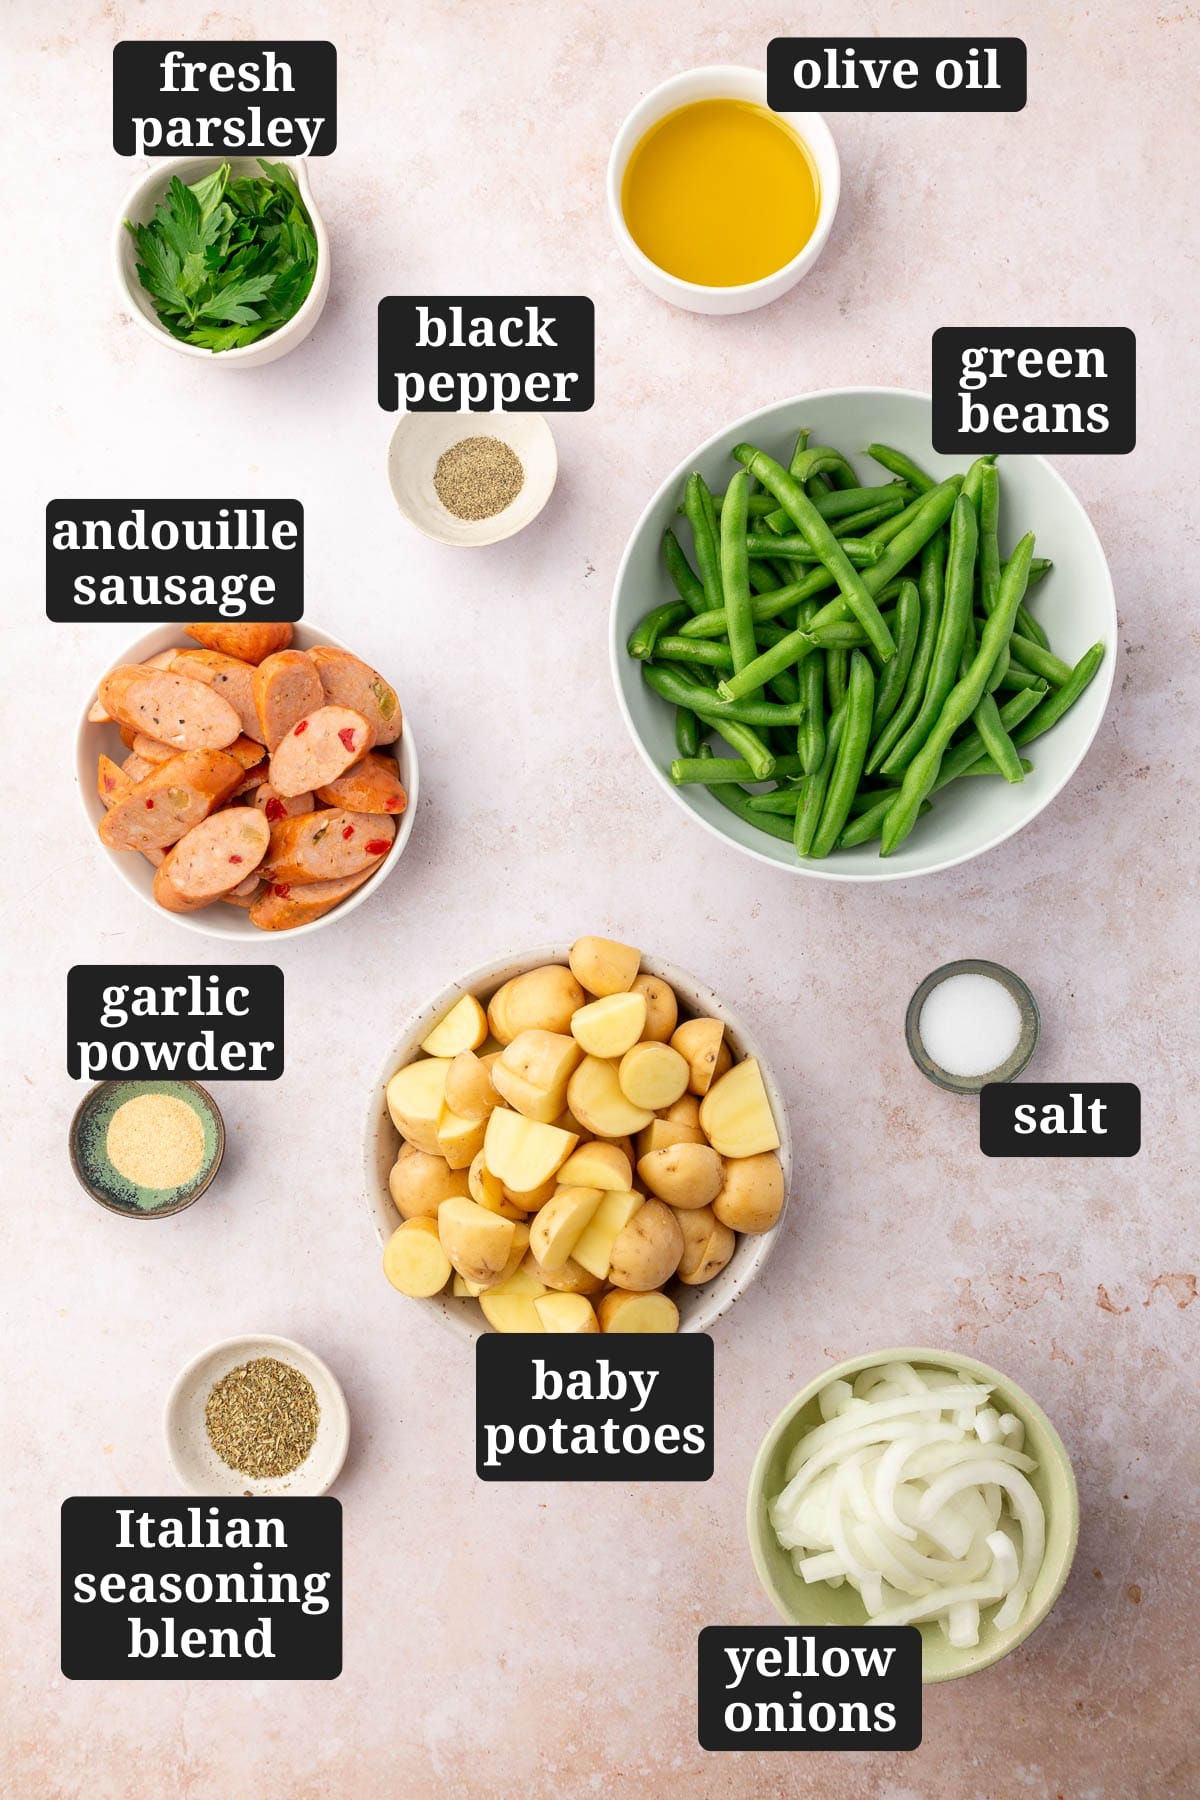 An overhead view of ingredients in bowls to make sheet pan sausage, green beans, and potatoes, including fresh parsley, black pepper, olive oil, green beans, andouille sausage, garlic powder, baby potatoes, salt, Italian seasoning blend, and yellow onions with text overlays over each ingredient.